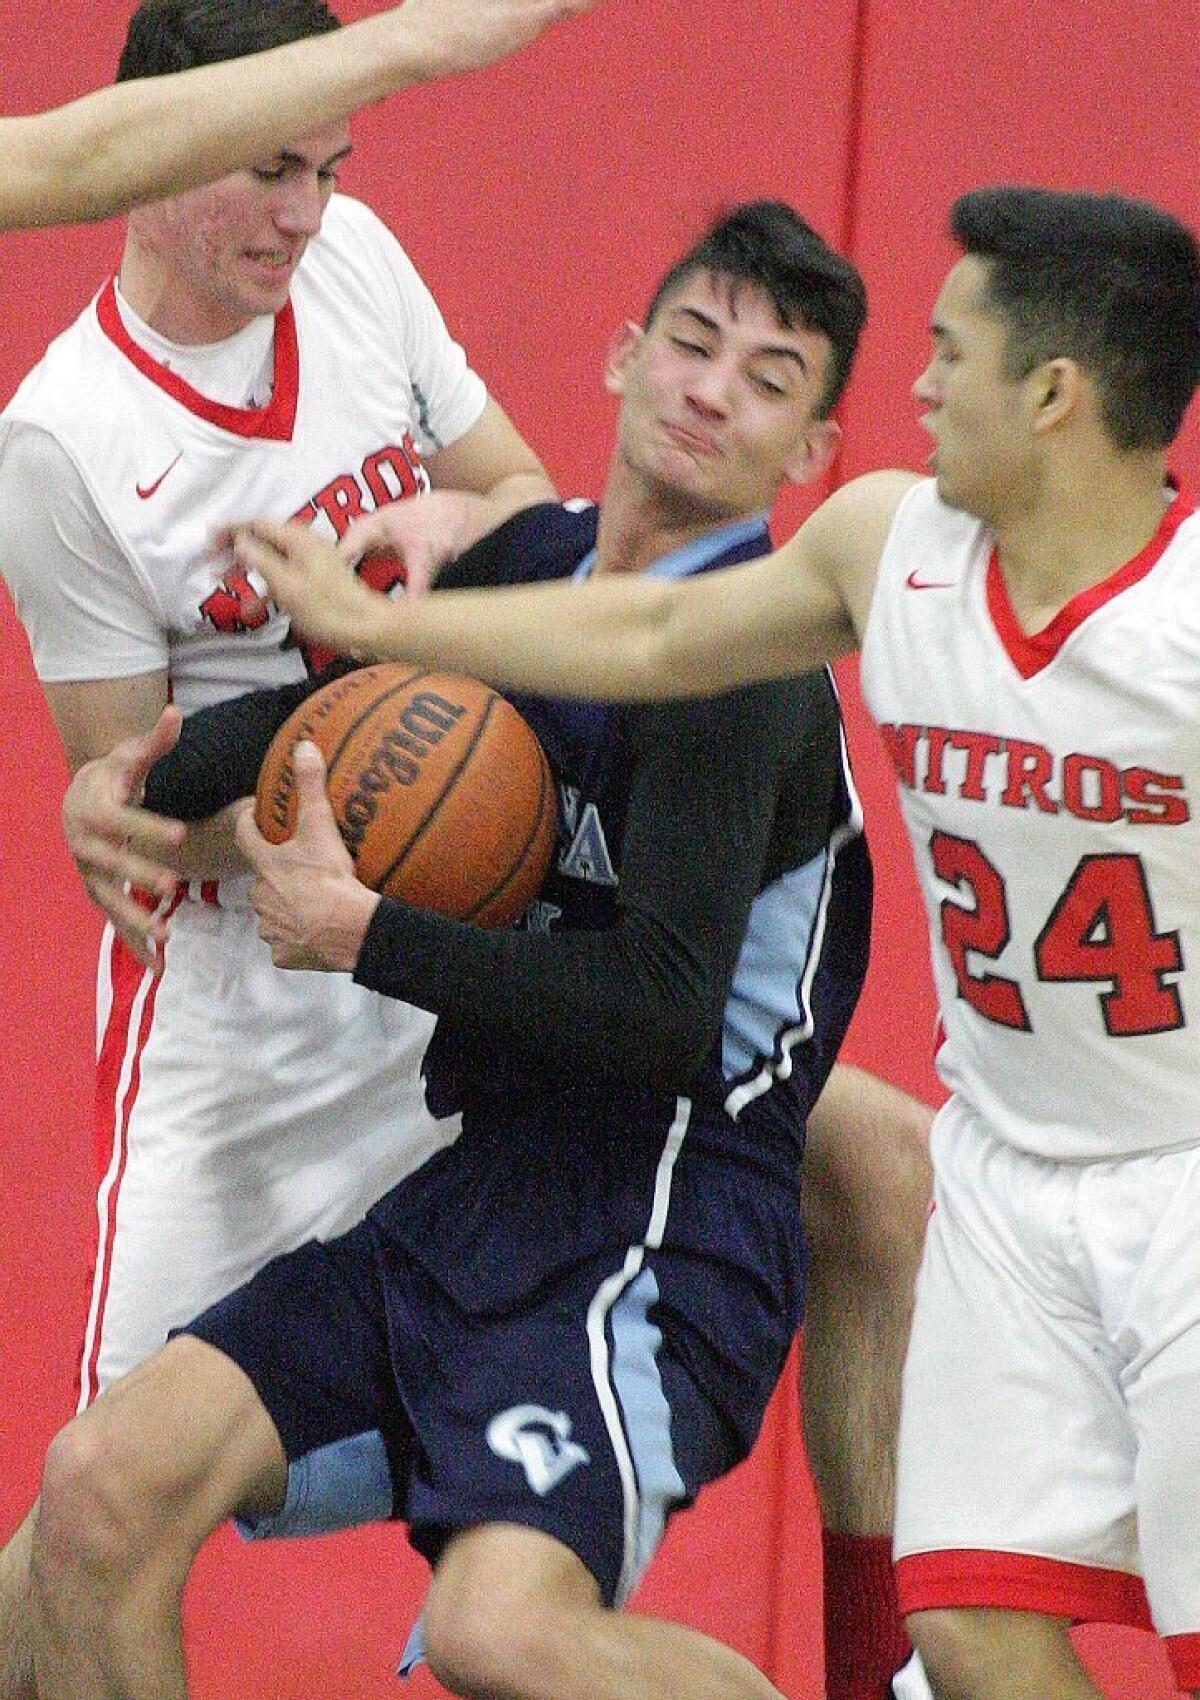 Crescenta Valley High boys' basketball pulled away from Glendale on Friday night.